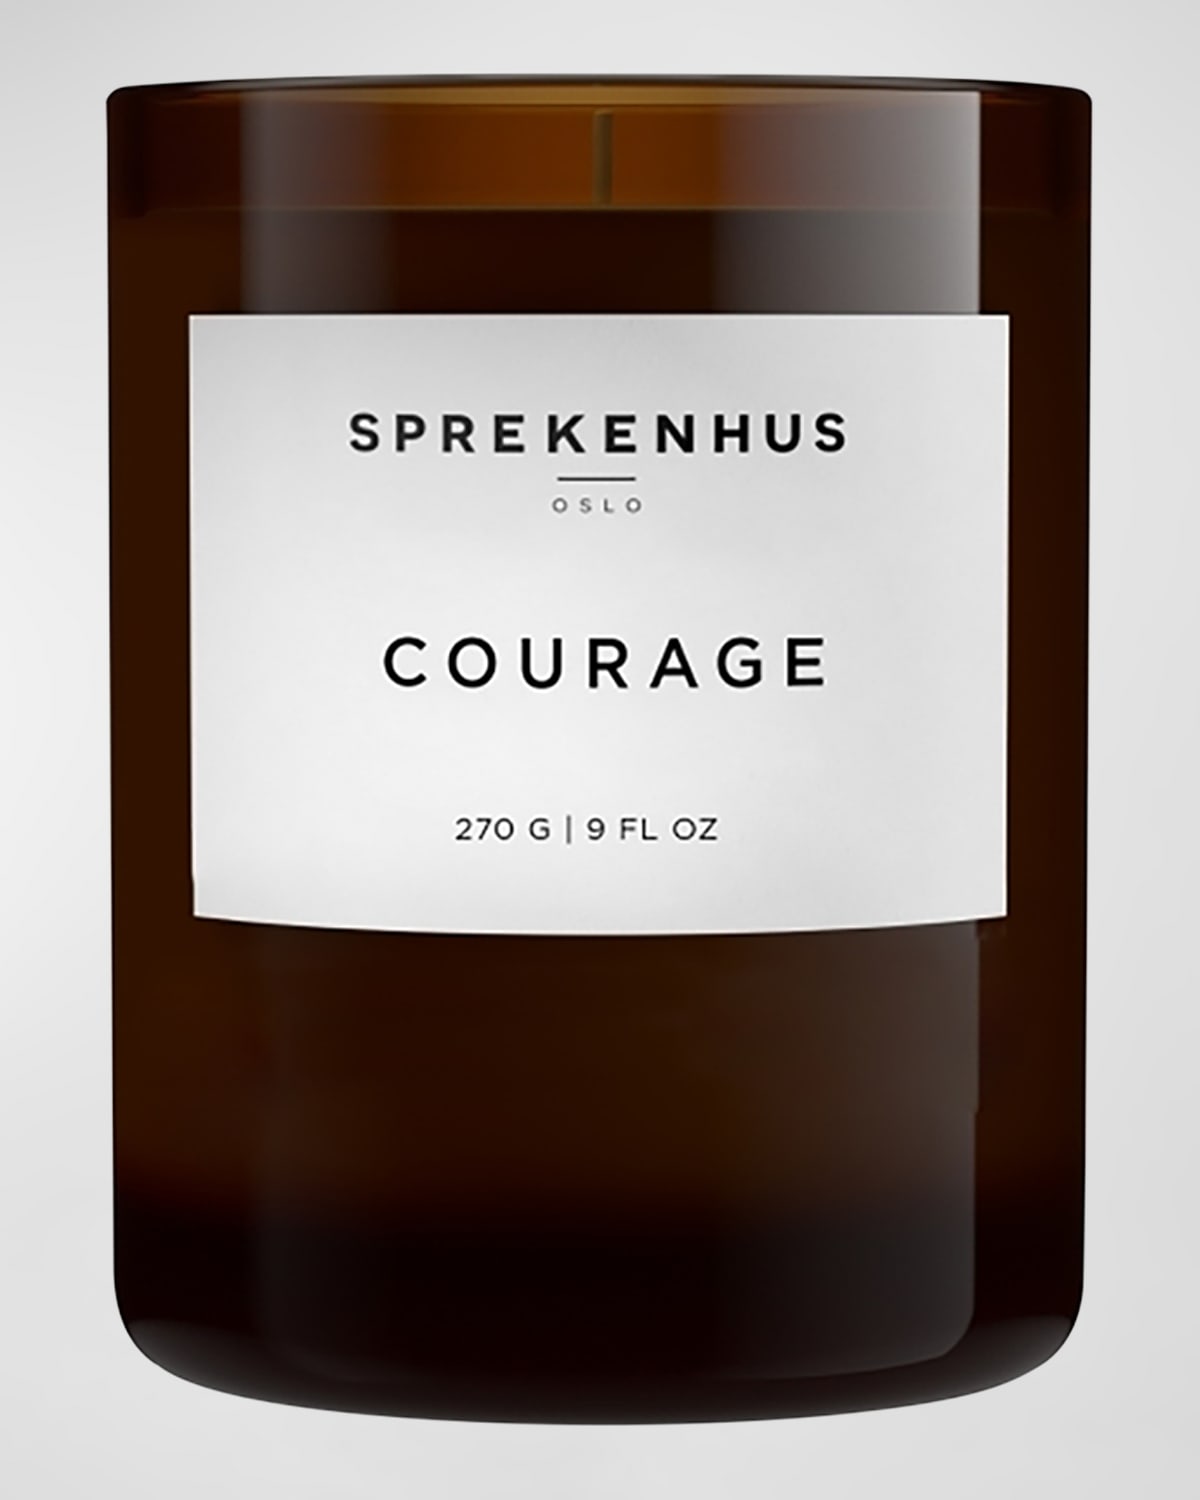 Sprekenhus Courage Fragranced Candle, 270 G In Brown